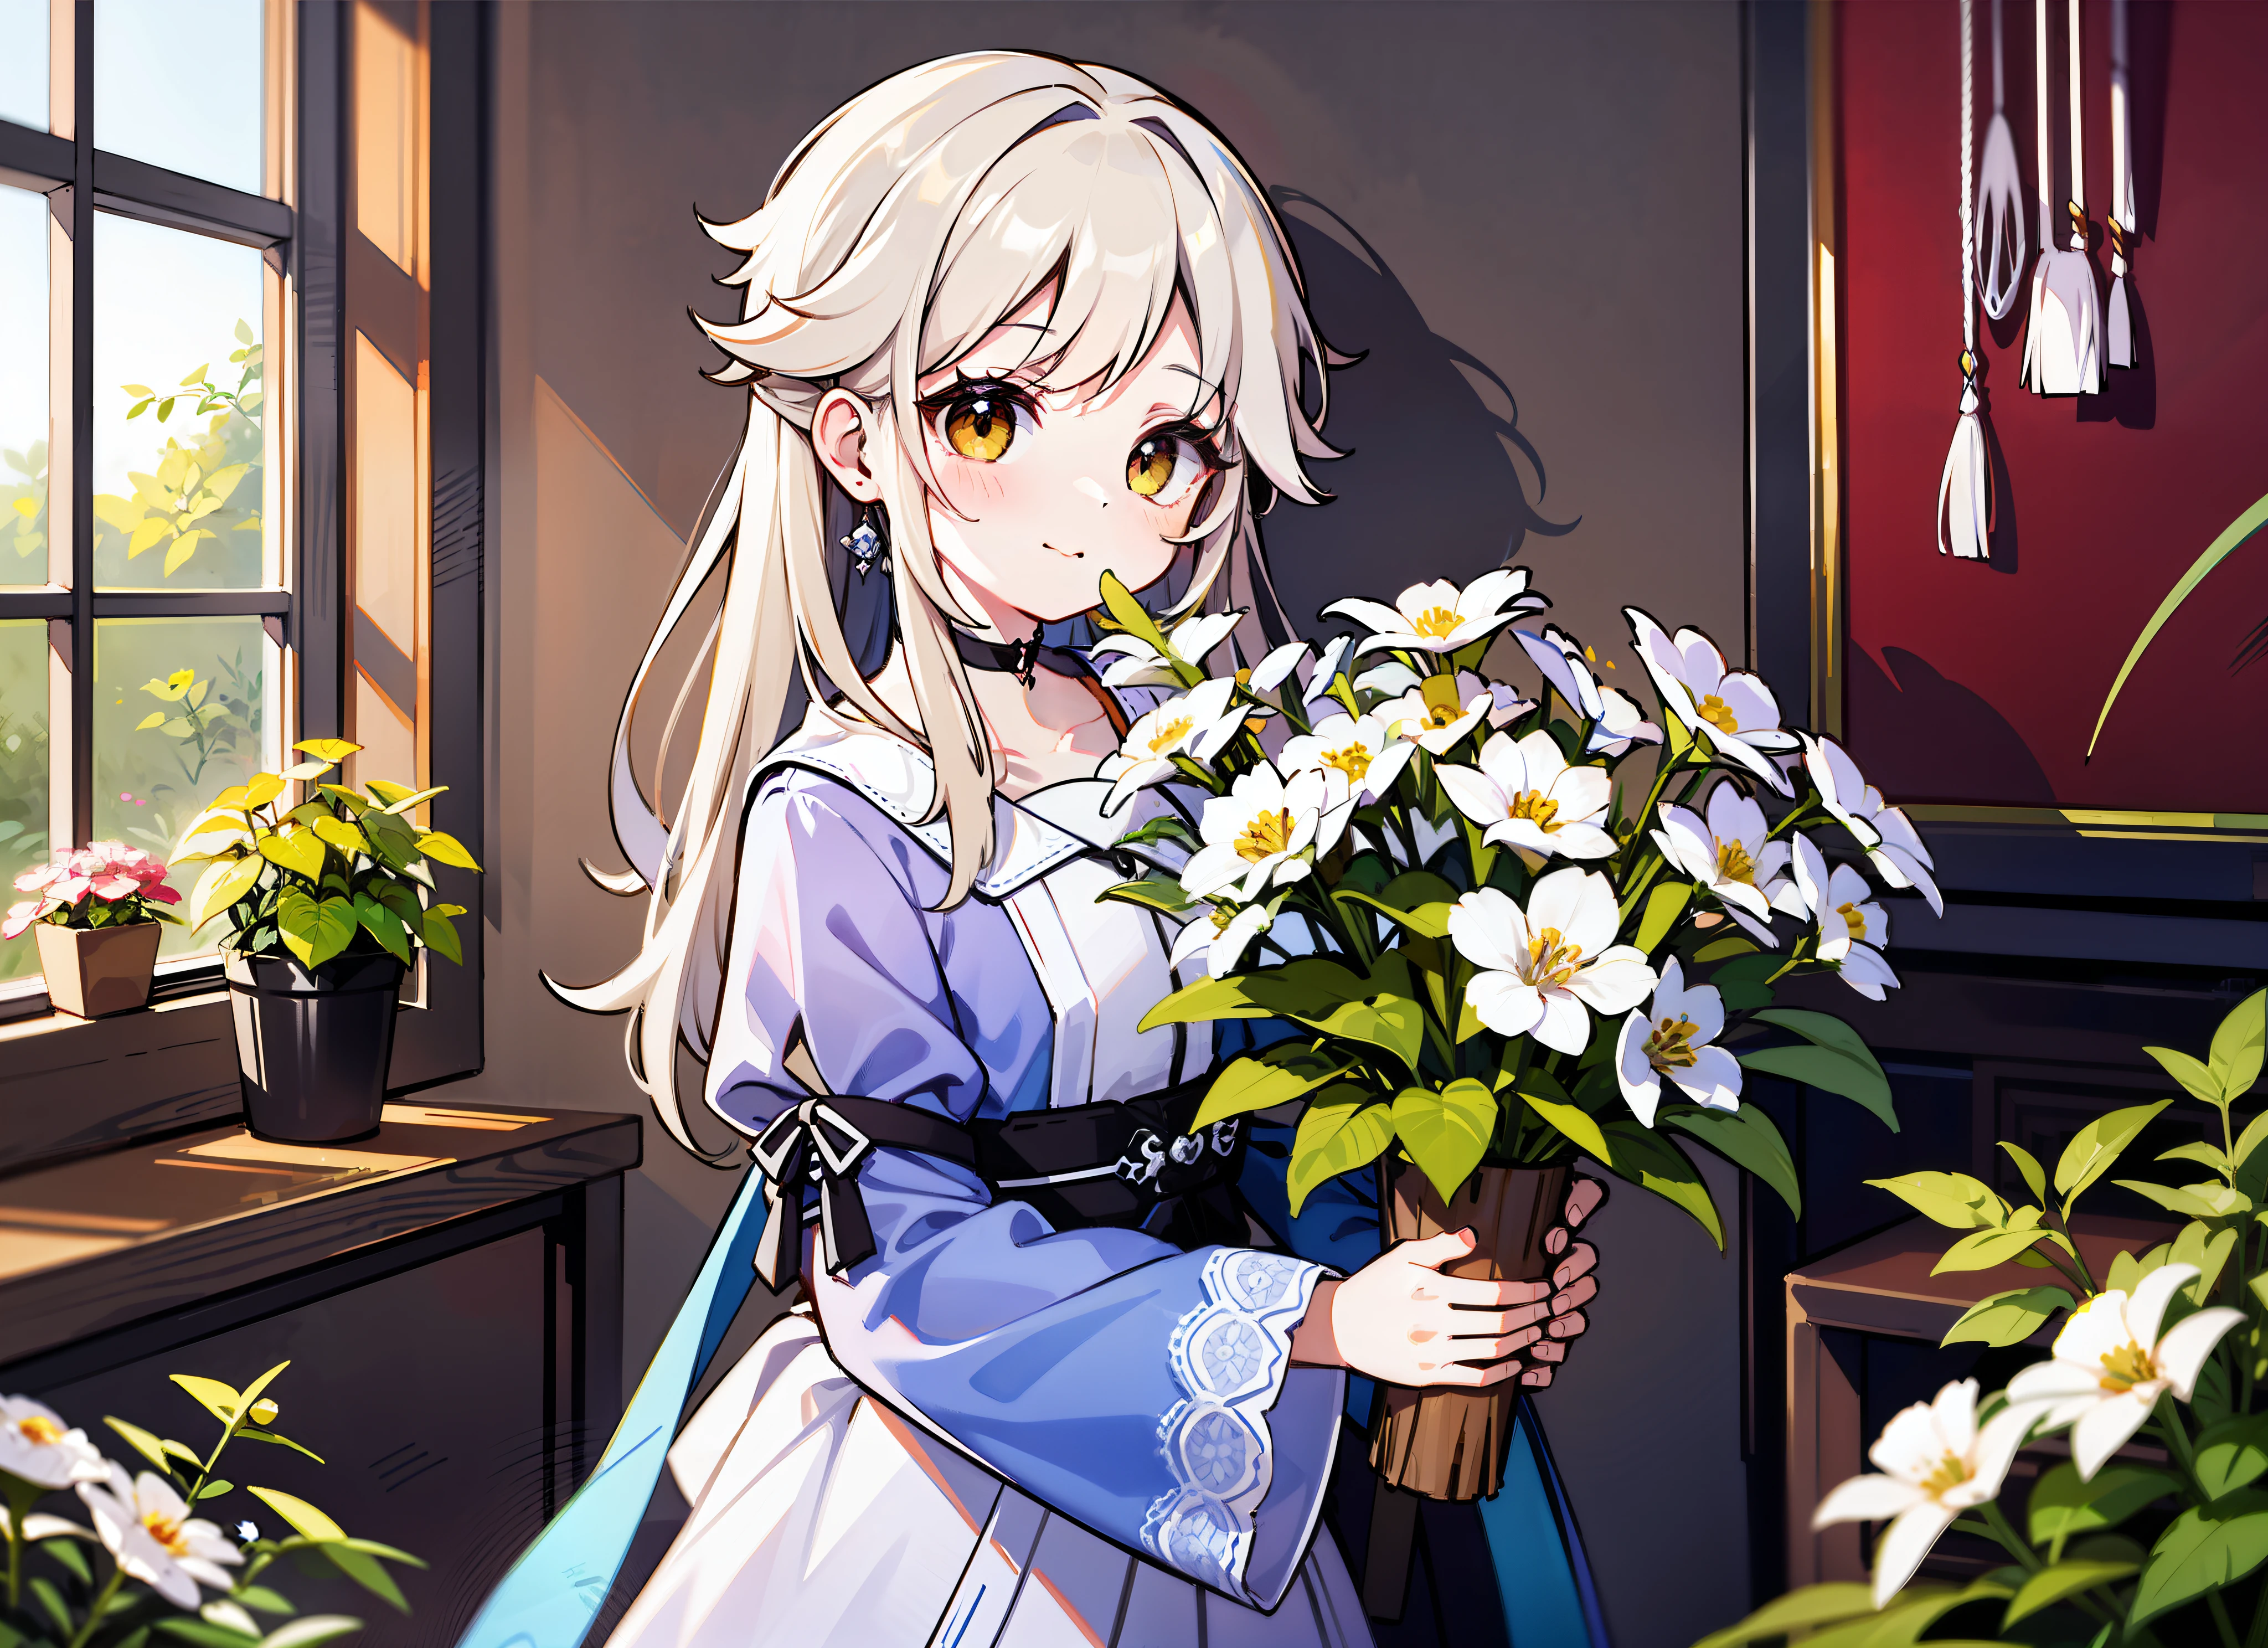 styled， masterpaintings， optimal quality， Special details， illustration，Sweet，interaction，Tuuli，florals，Lover holding flowers，Atmosphere of love，Fresh tones，Simple background，Girls have long white hair，The boy has short white hair，